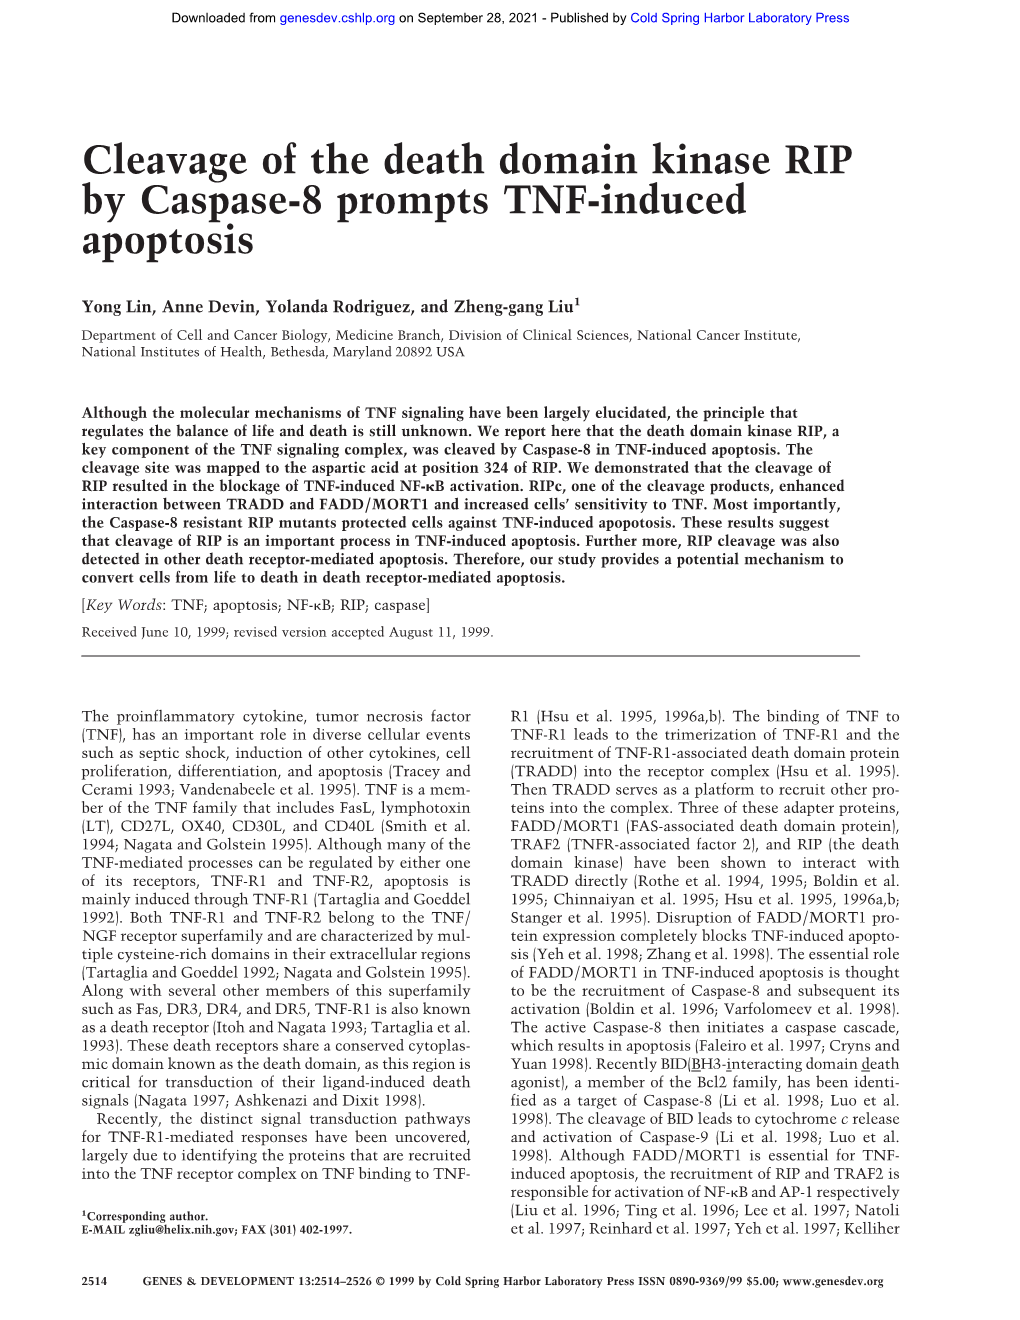 Cleavage of the Death Domain Kinase RIP by Caspase-8 Prompts TNF-Induced Apoptosis